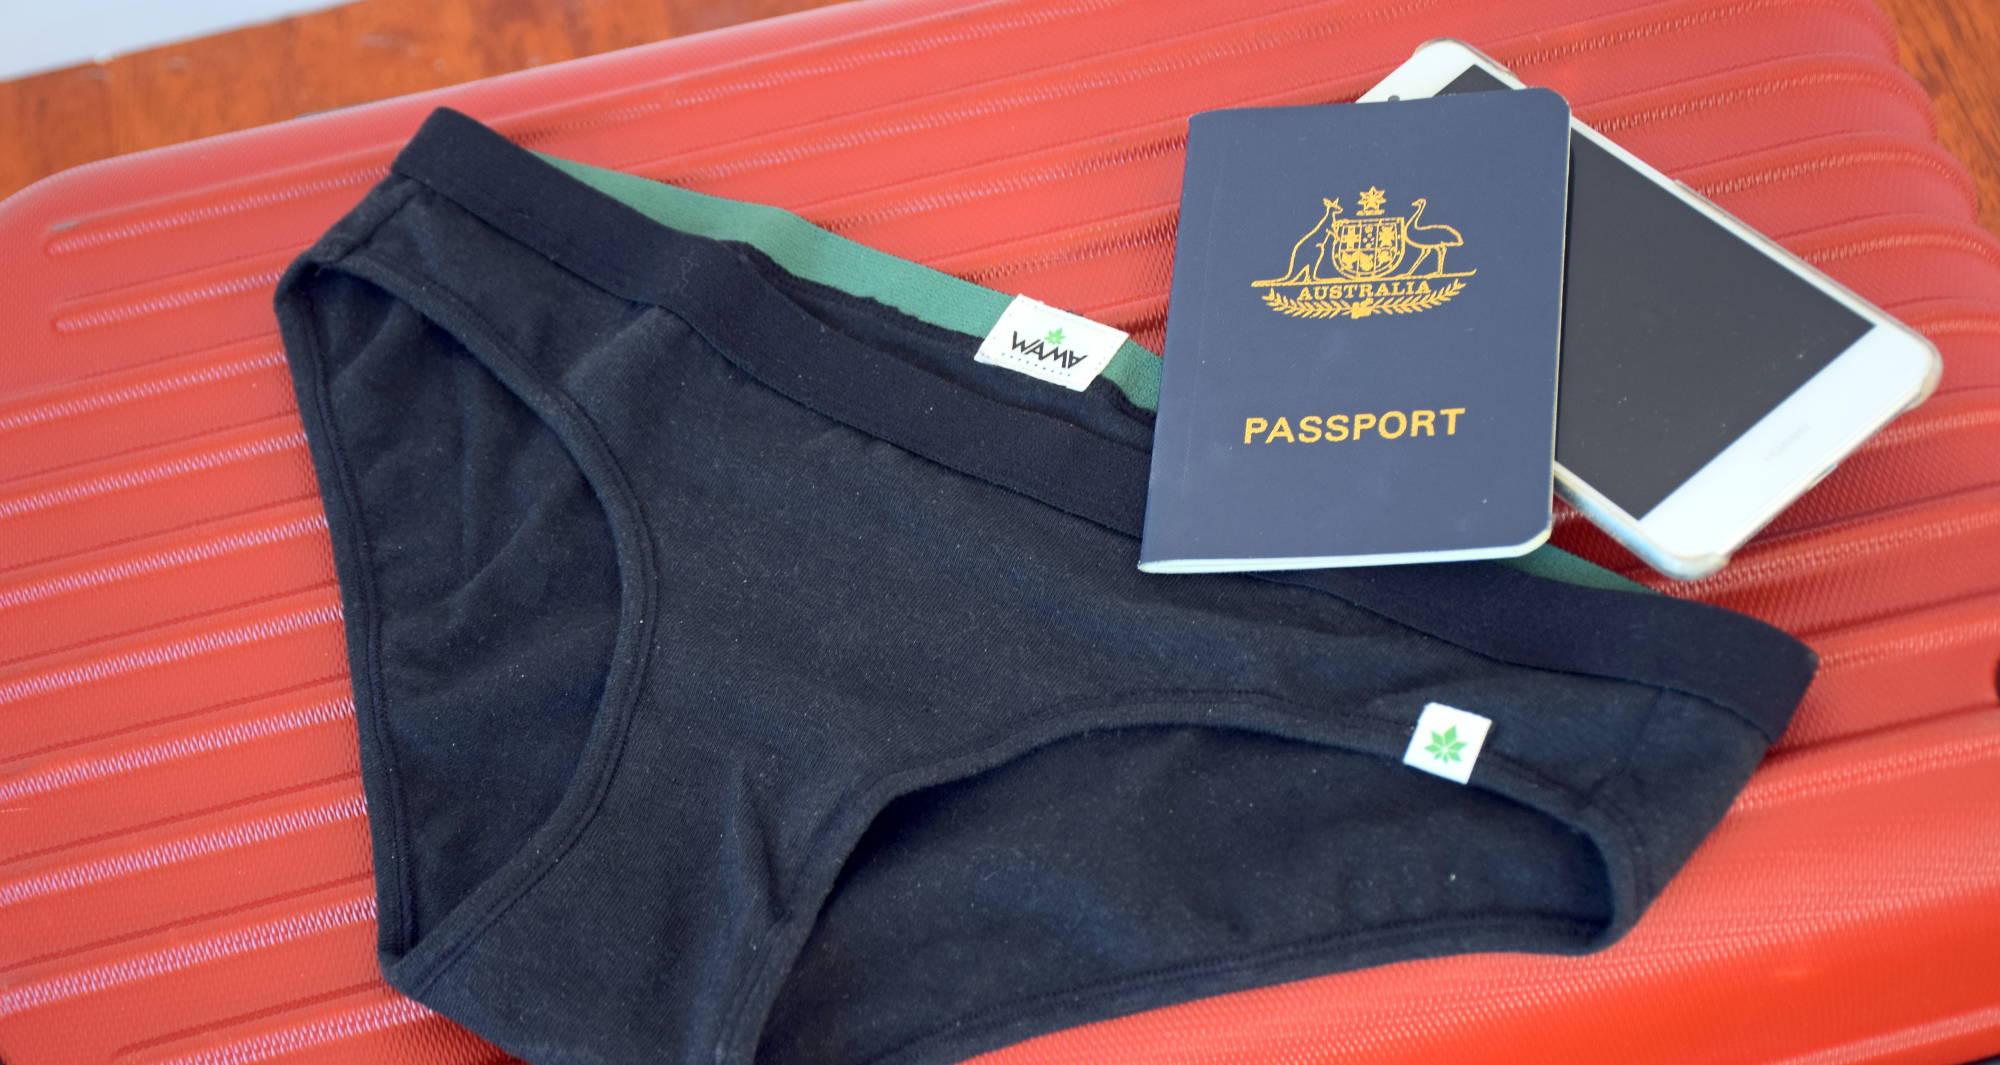 a pair of black underwear with a passport on top laid on an orange suitcase